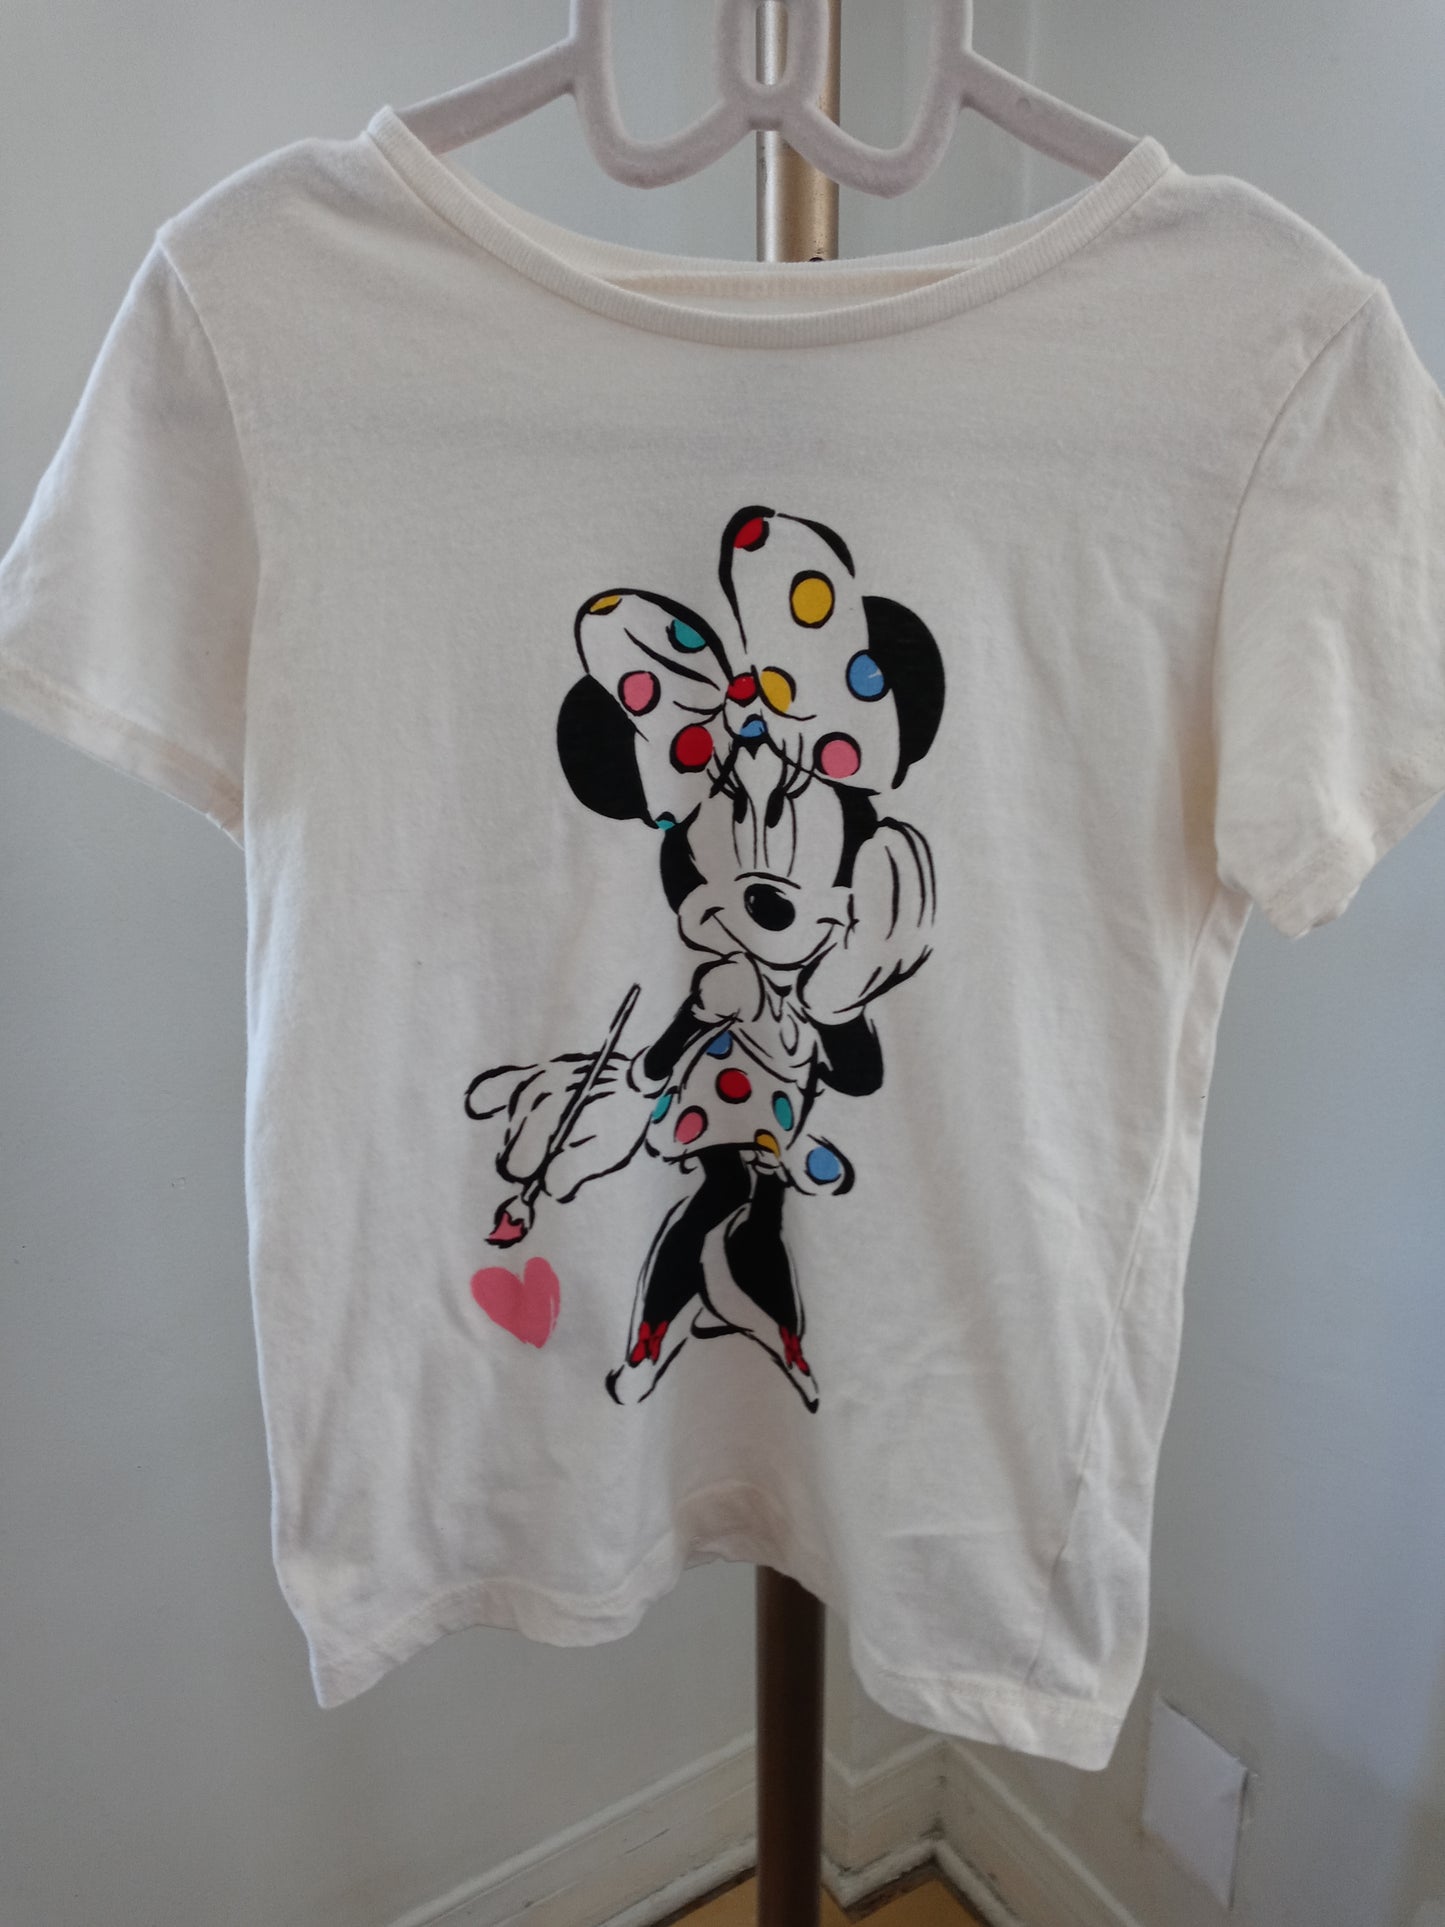 Disney Minnie Mouse Multi Color Polka Dot Painting T Shirt -